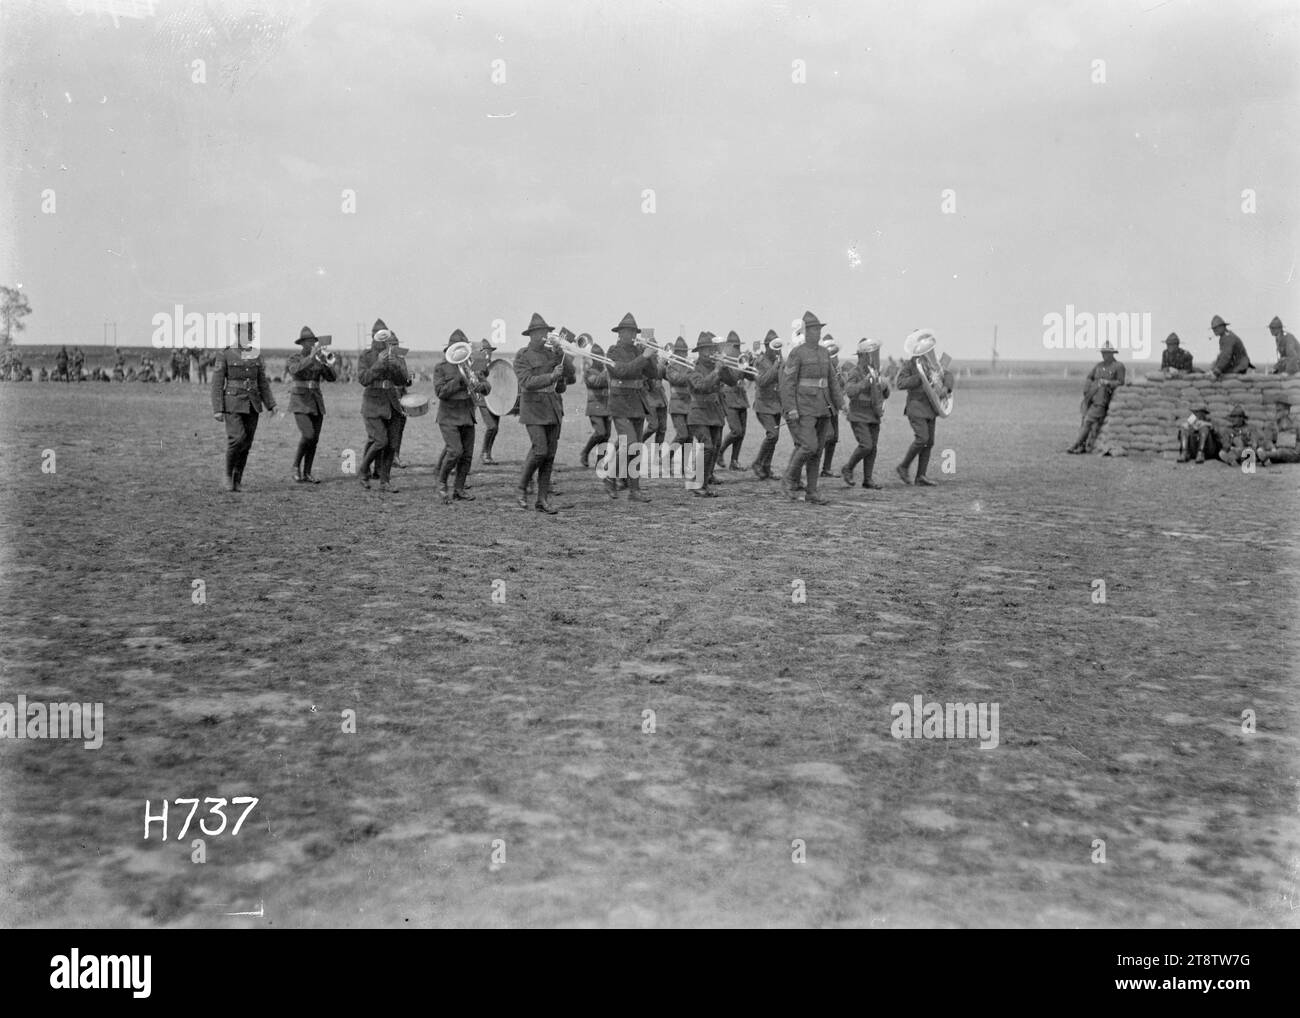 Judging at the New Zealand Divisional band contest, France, An RSM of the Grenadier Guards judges the marching of a brass band at the New Zealand Divisional band contest in Authie, France, during World War I. Photograph taken 27 July 1918 Stock Photo